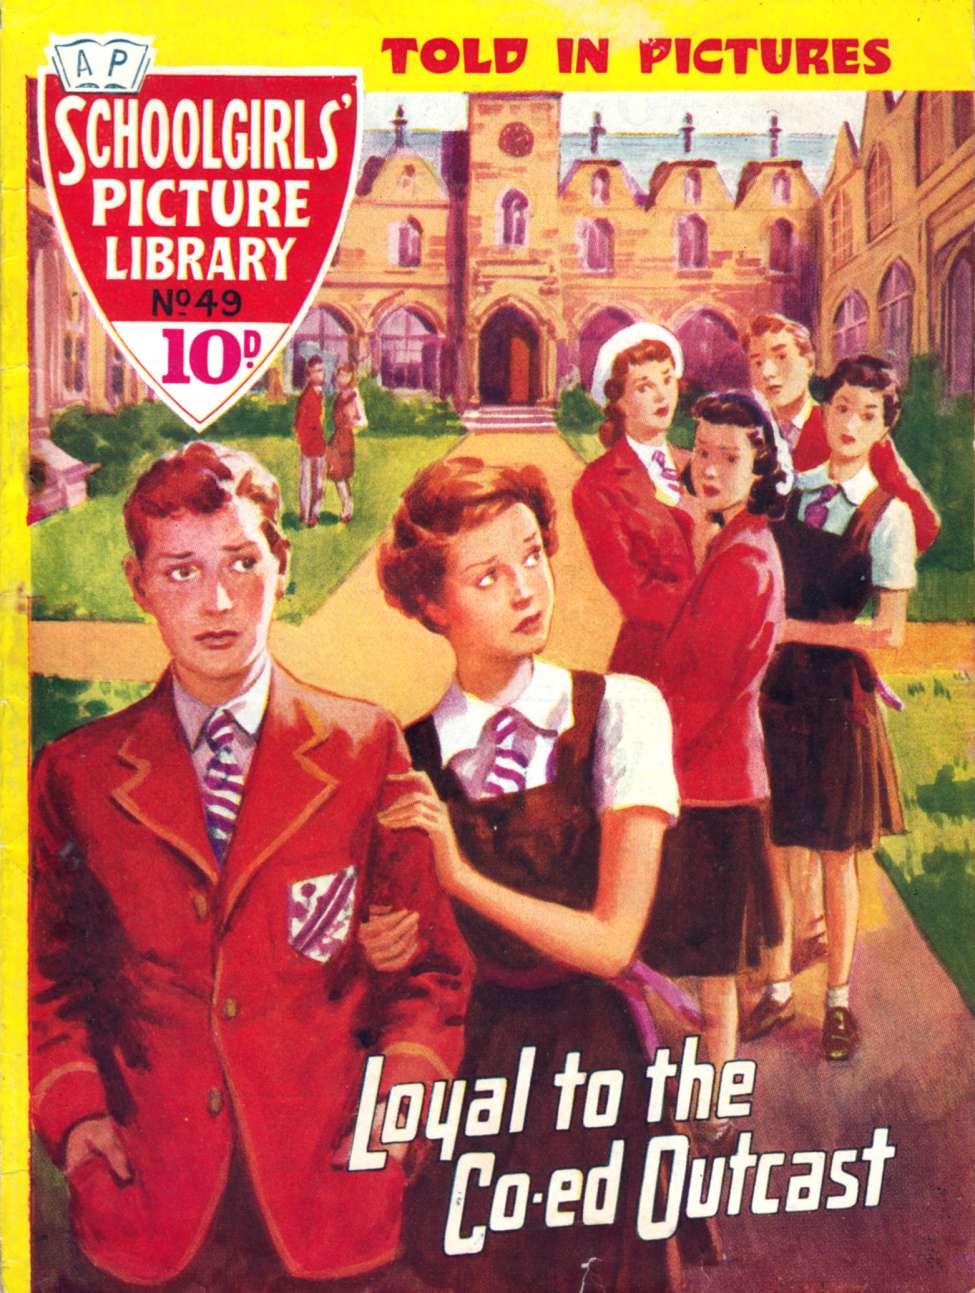 Book Cover For Schoolgirls' Picture Library 49 - Loyal to The Co-ed Outcast